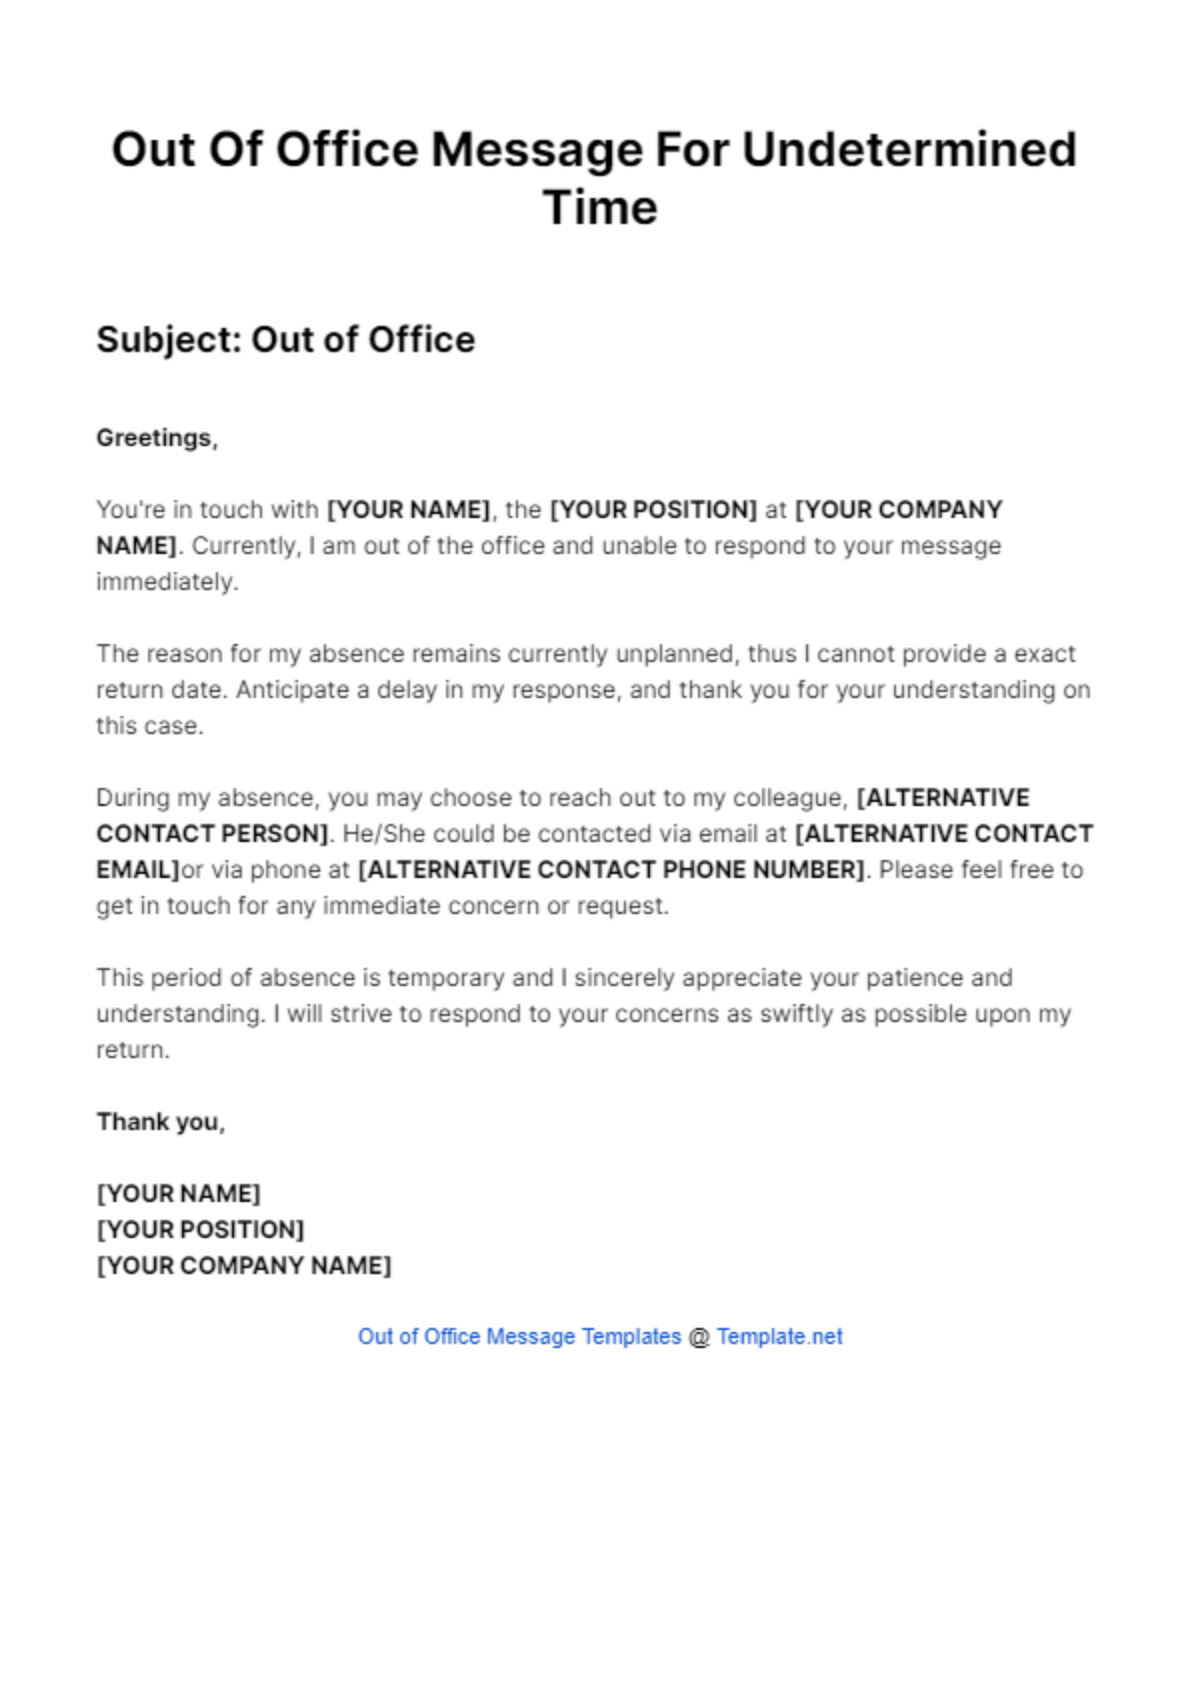 Out Of Office Message For Undetermined Time Template